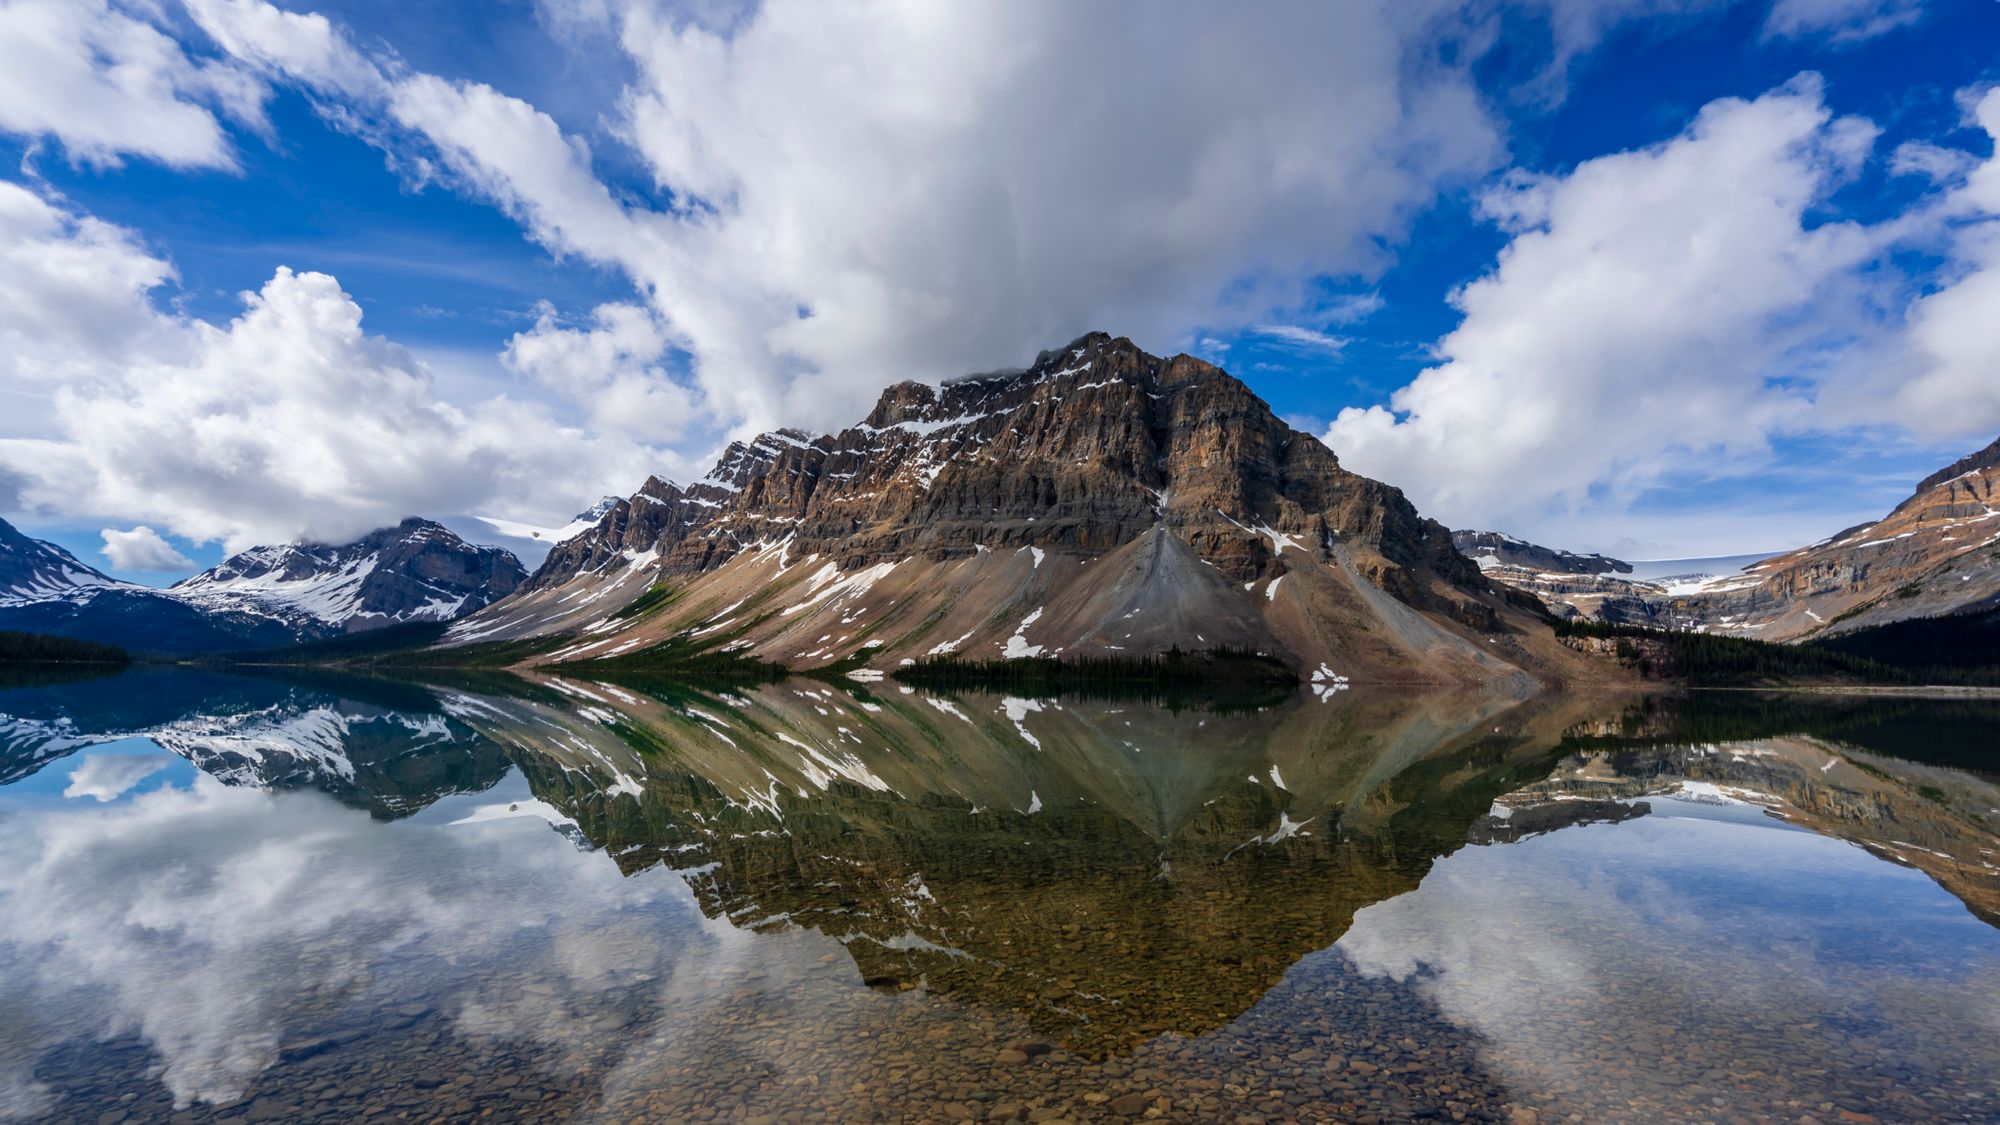 The still waters on Bow Lake.